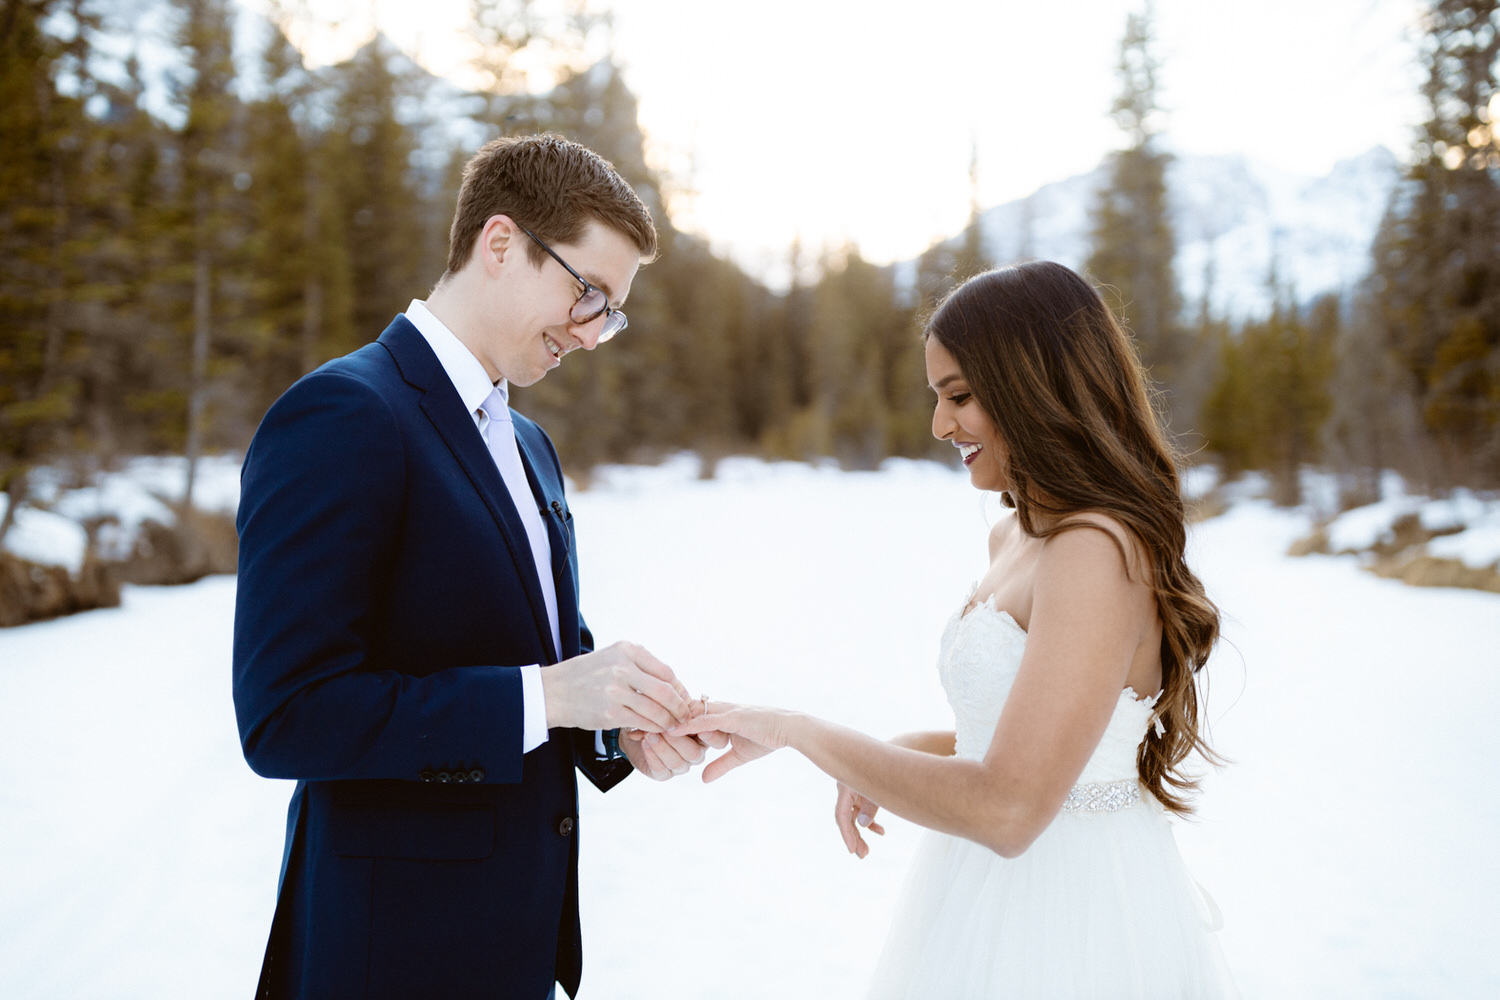 Canmore wedding videographer - Image 21